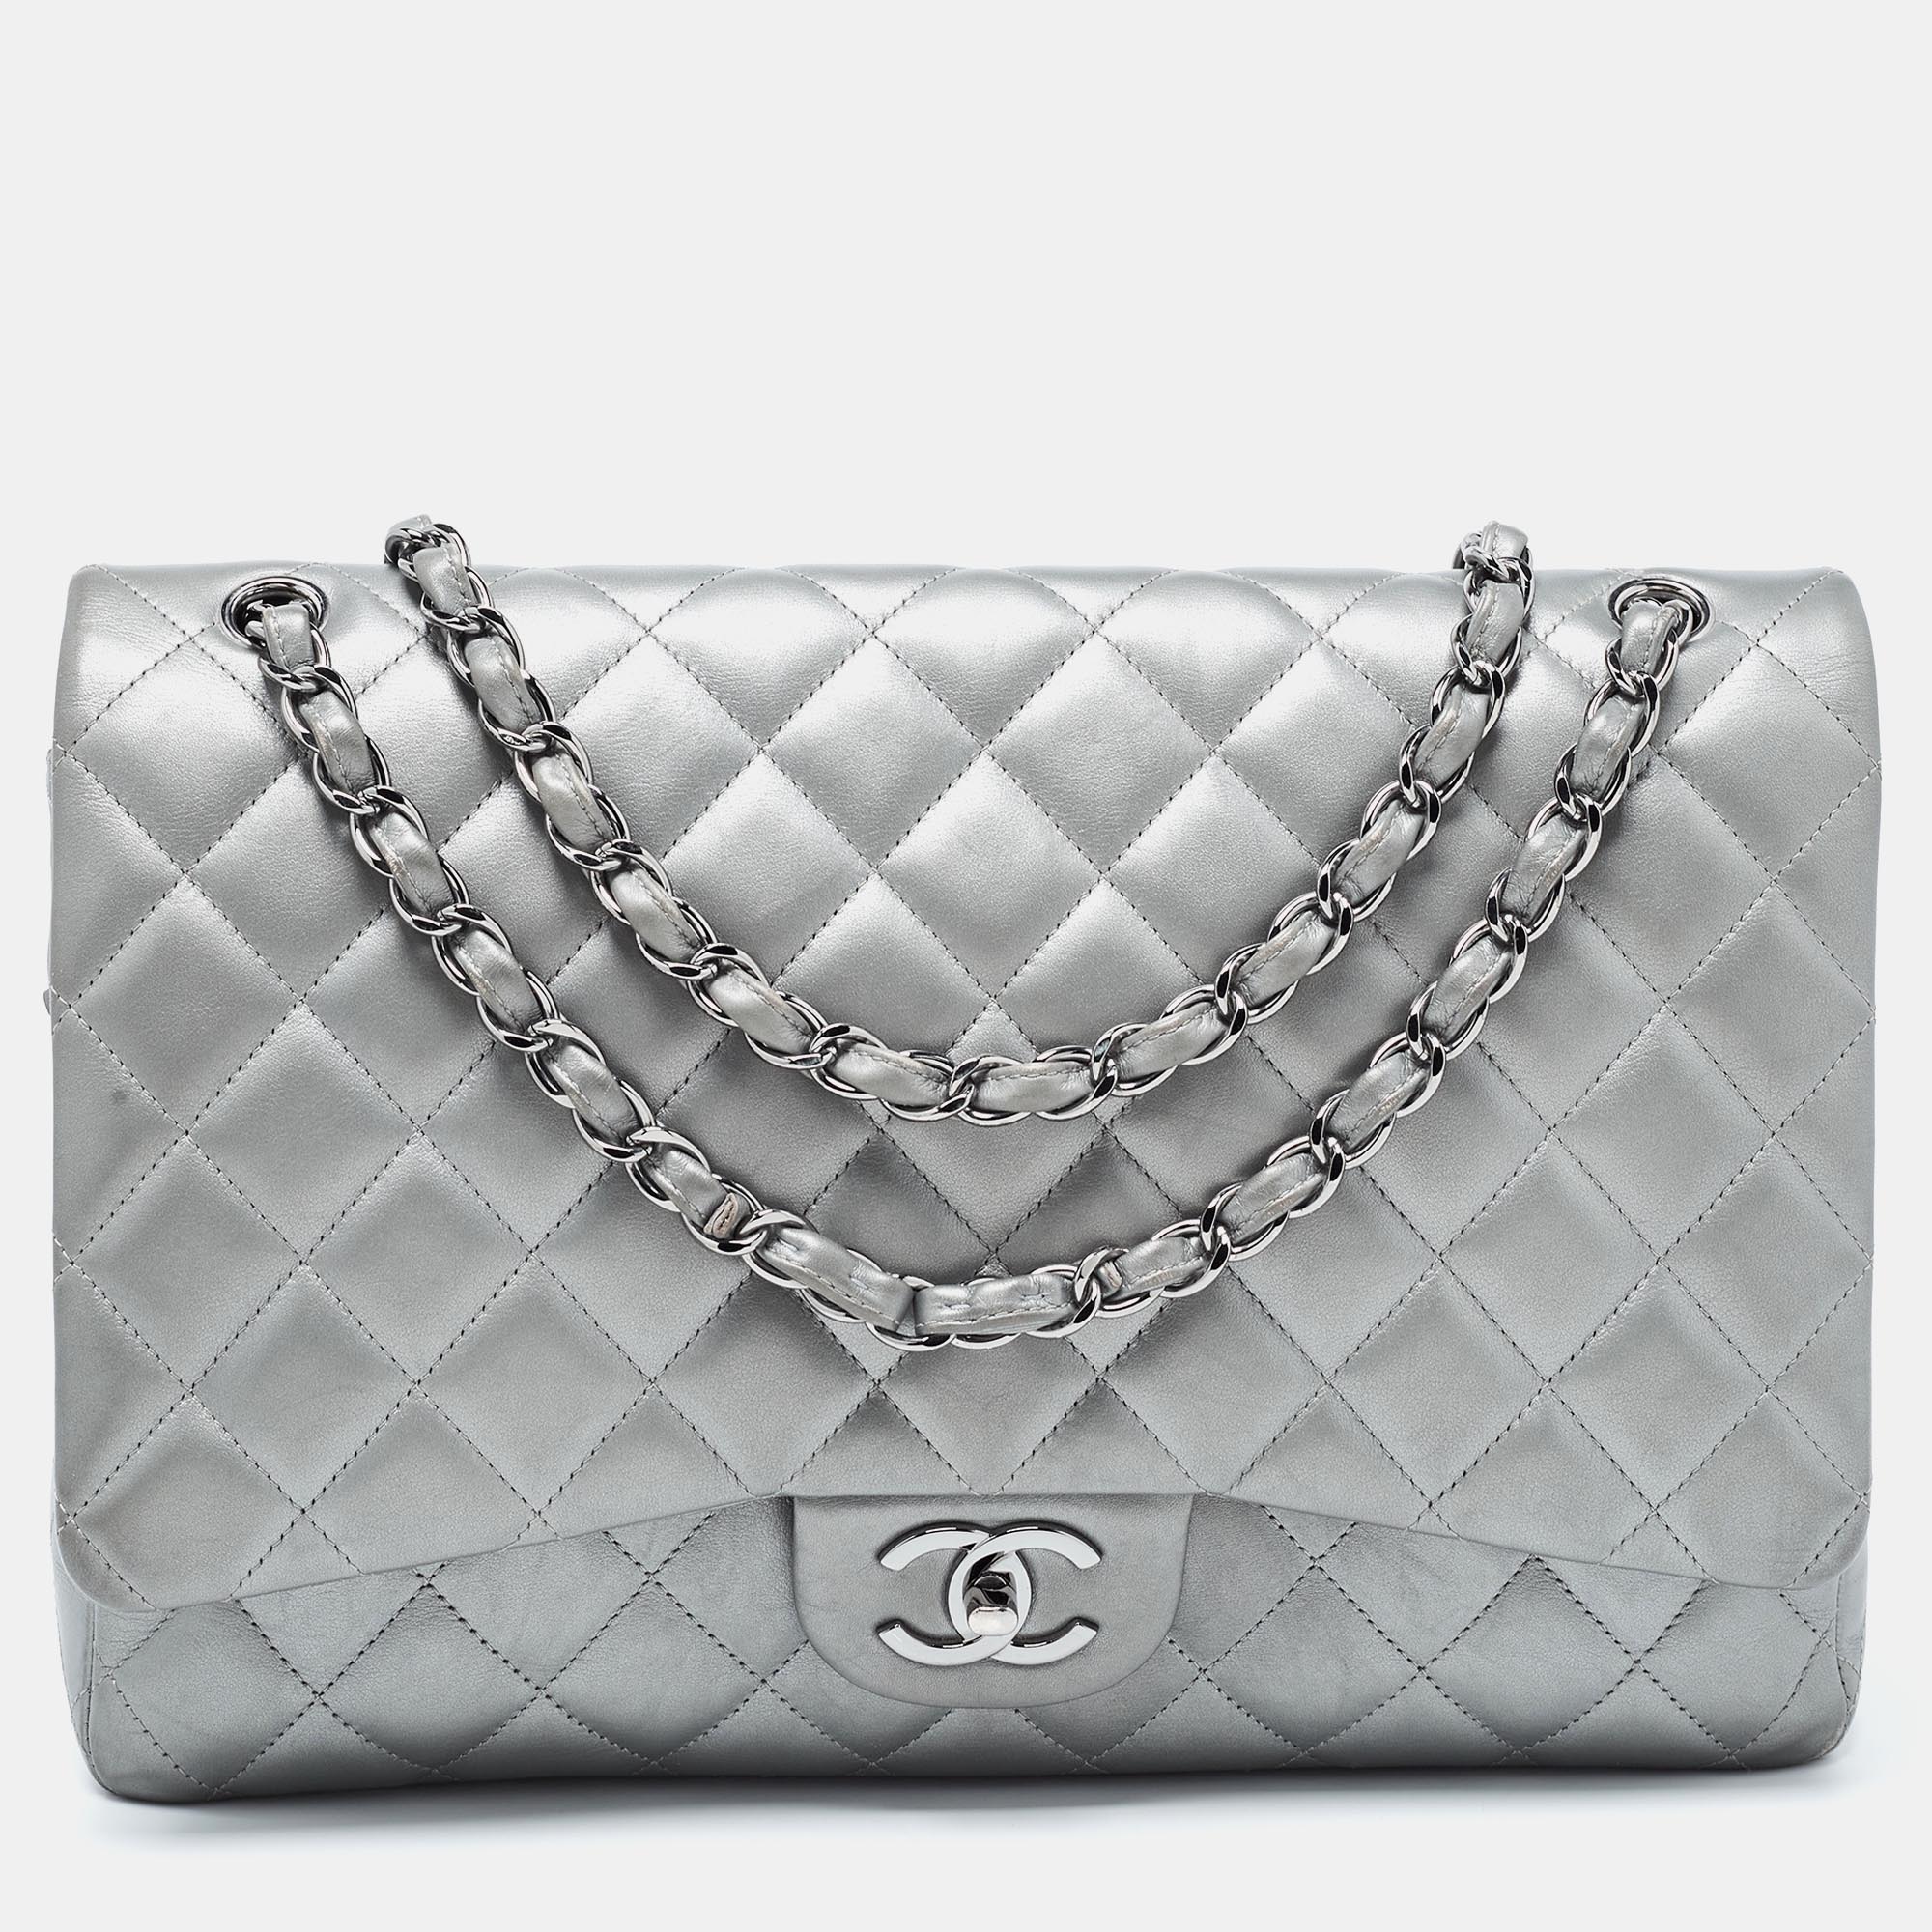 Chanel grey quilted leather maxi classic double flap bag